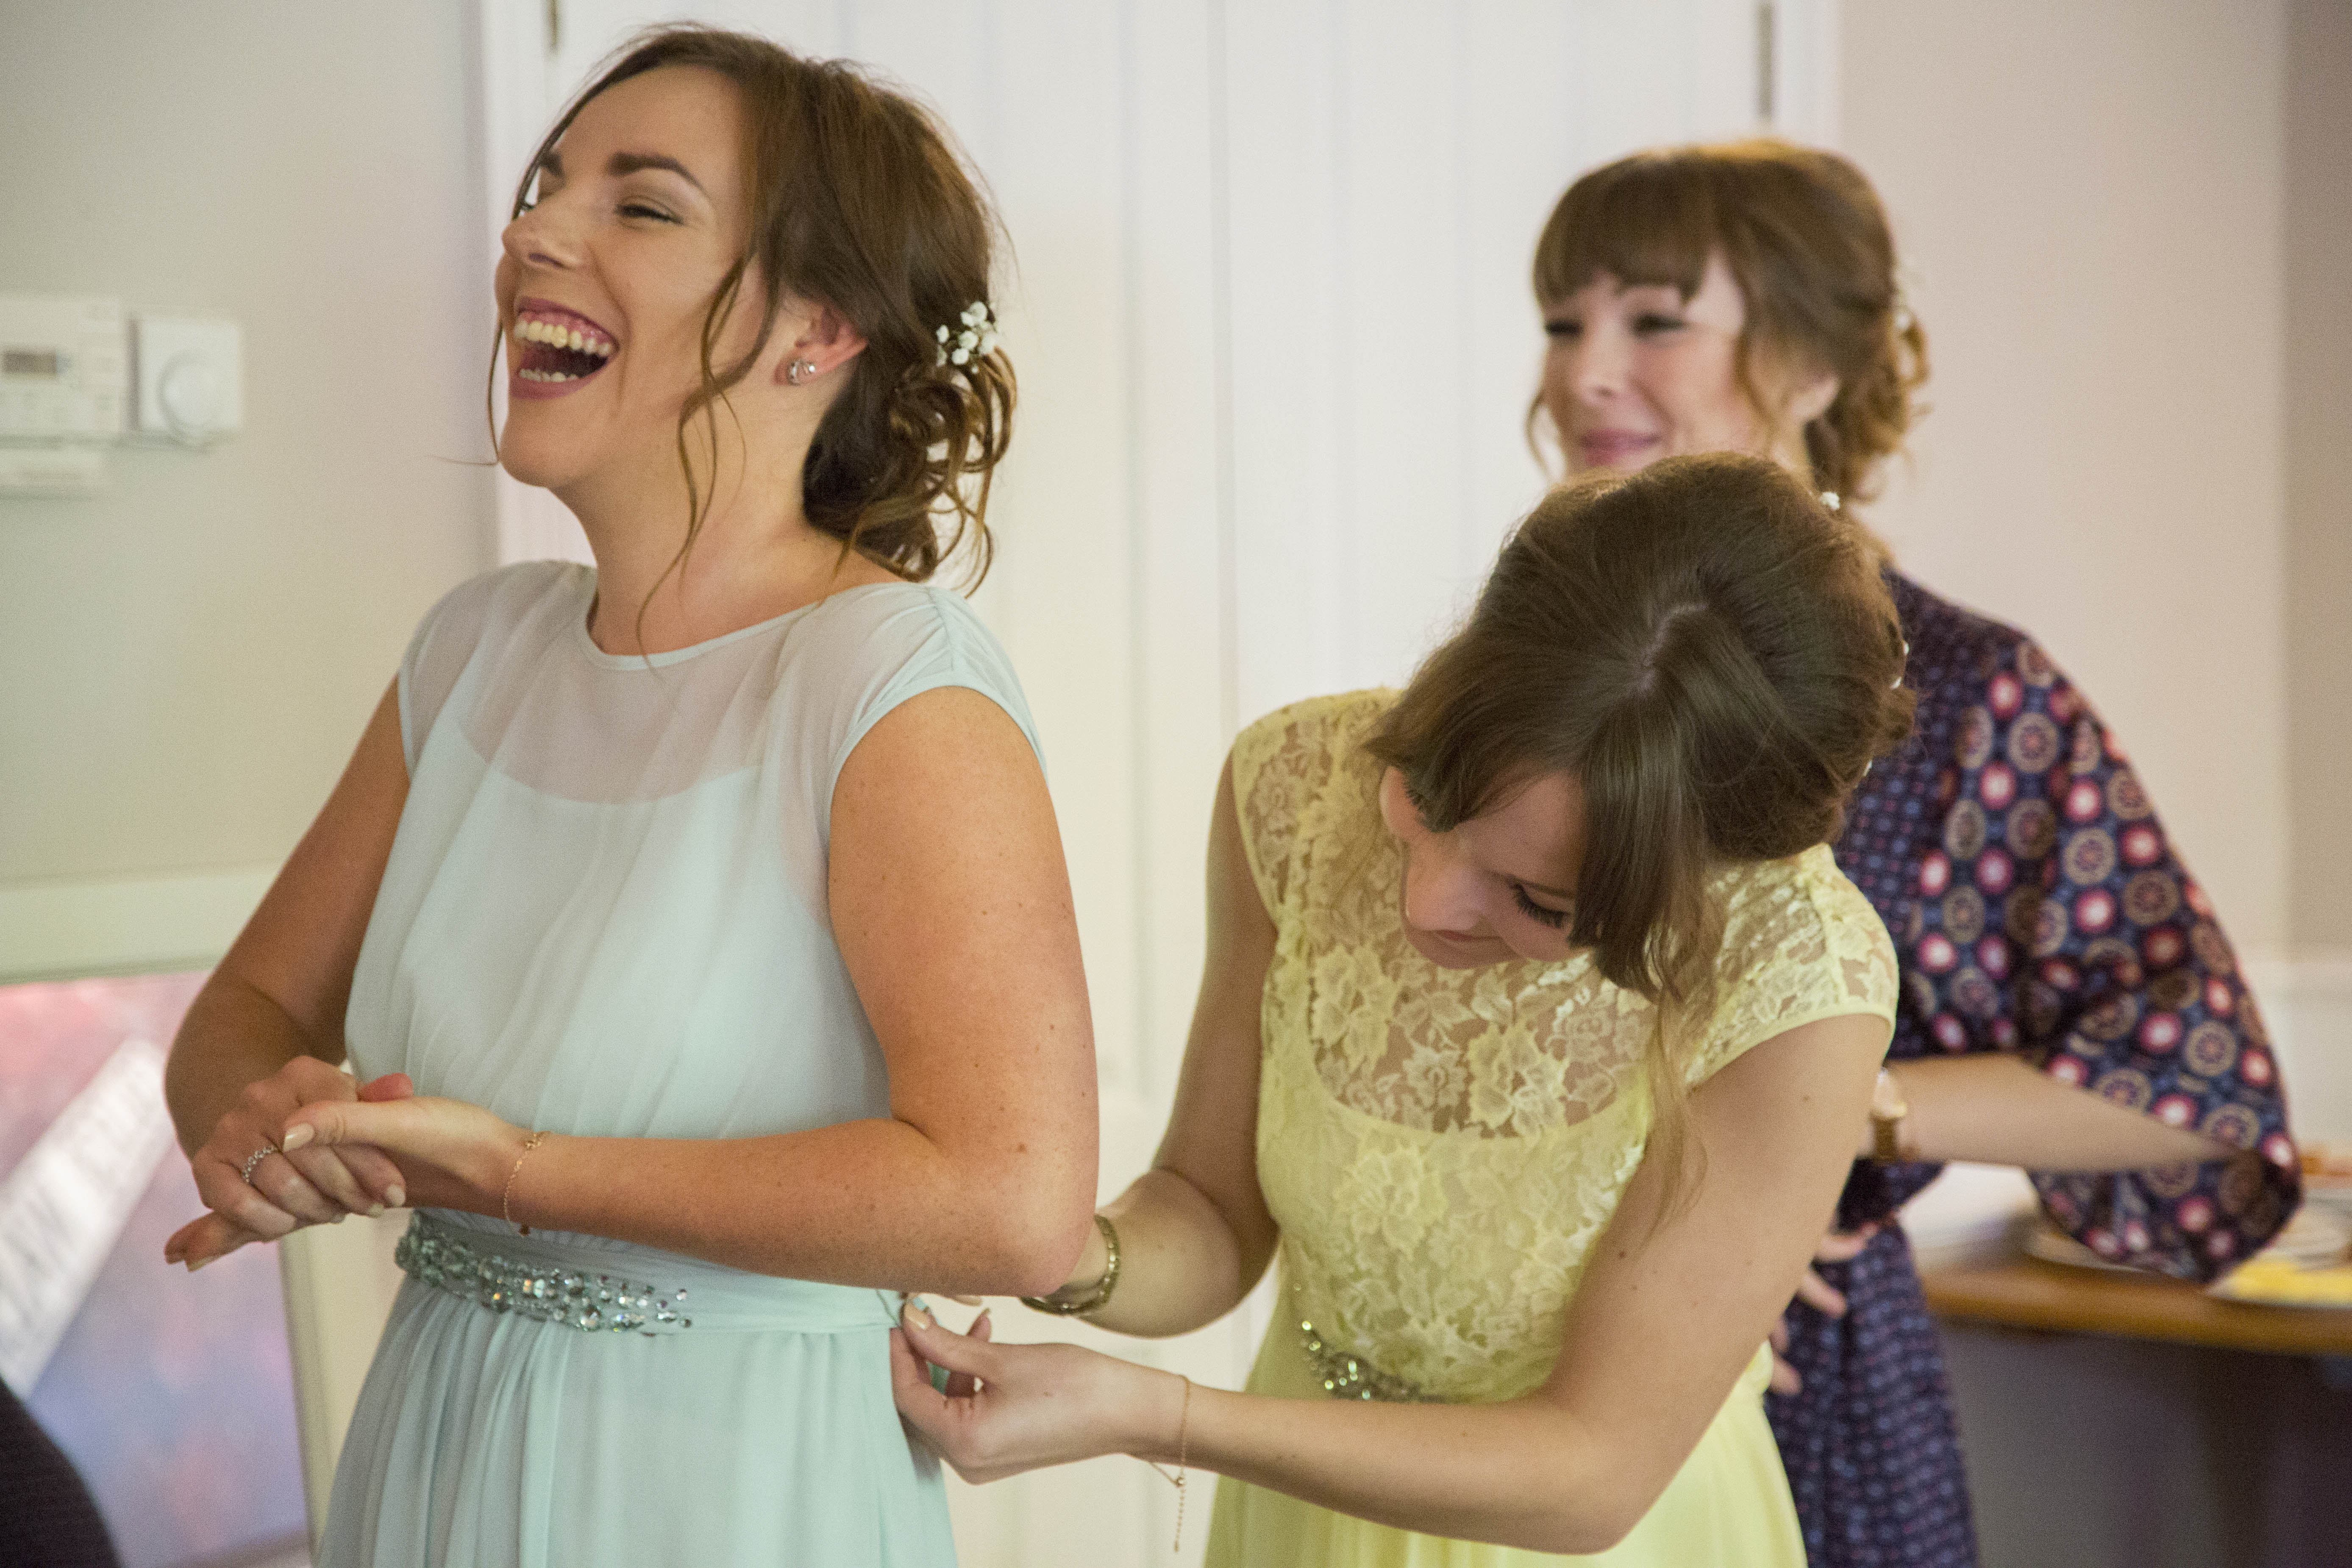 Isle of Wight Wedding and Portrait Photographer - Holly Cade Photography